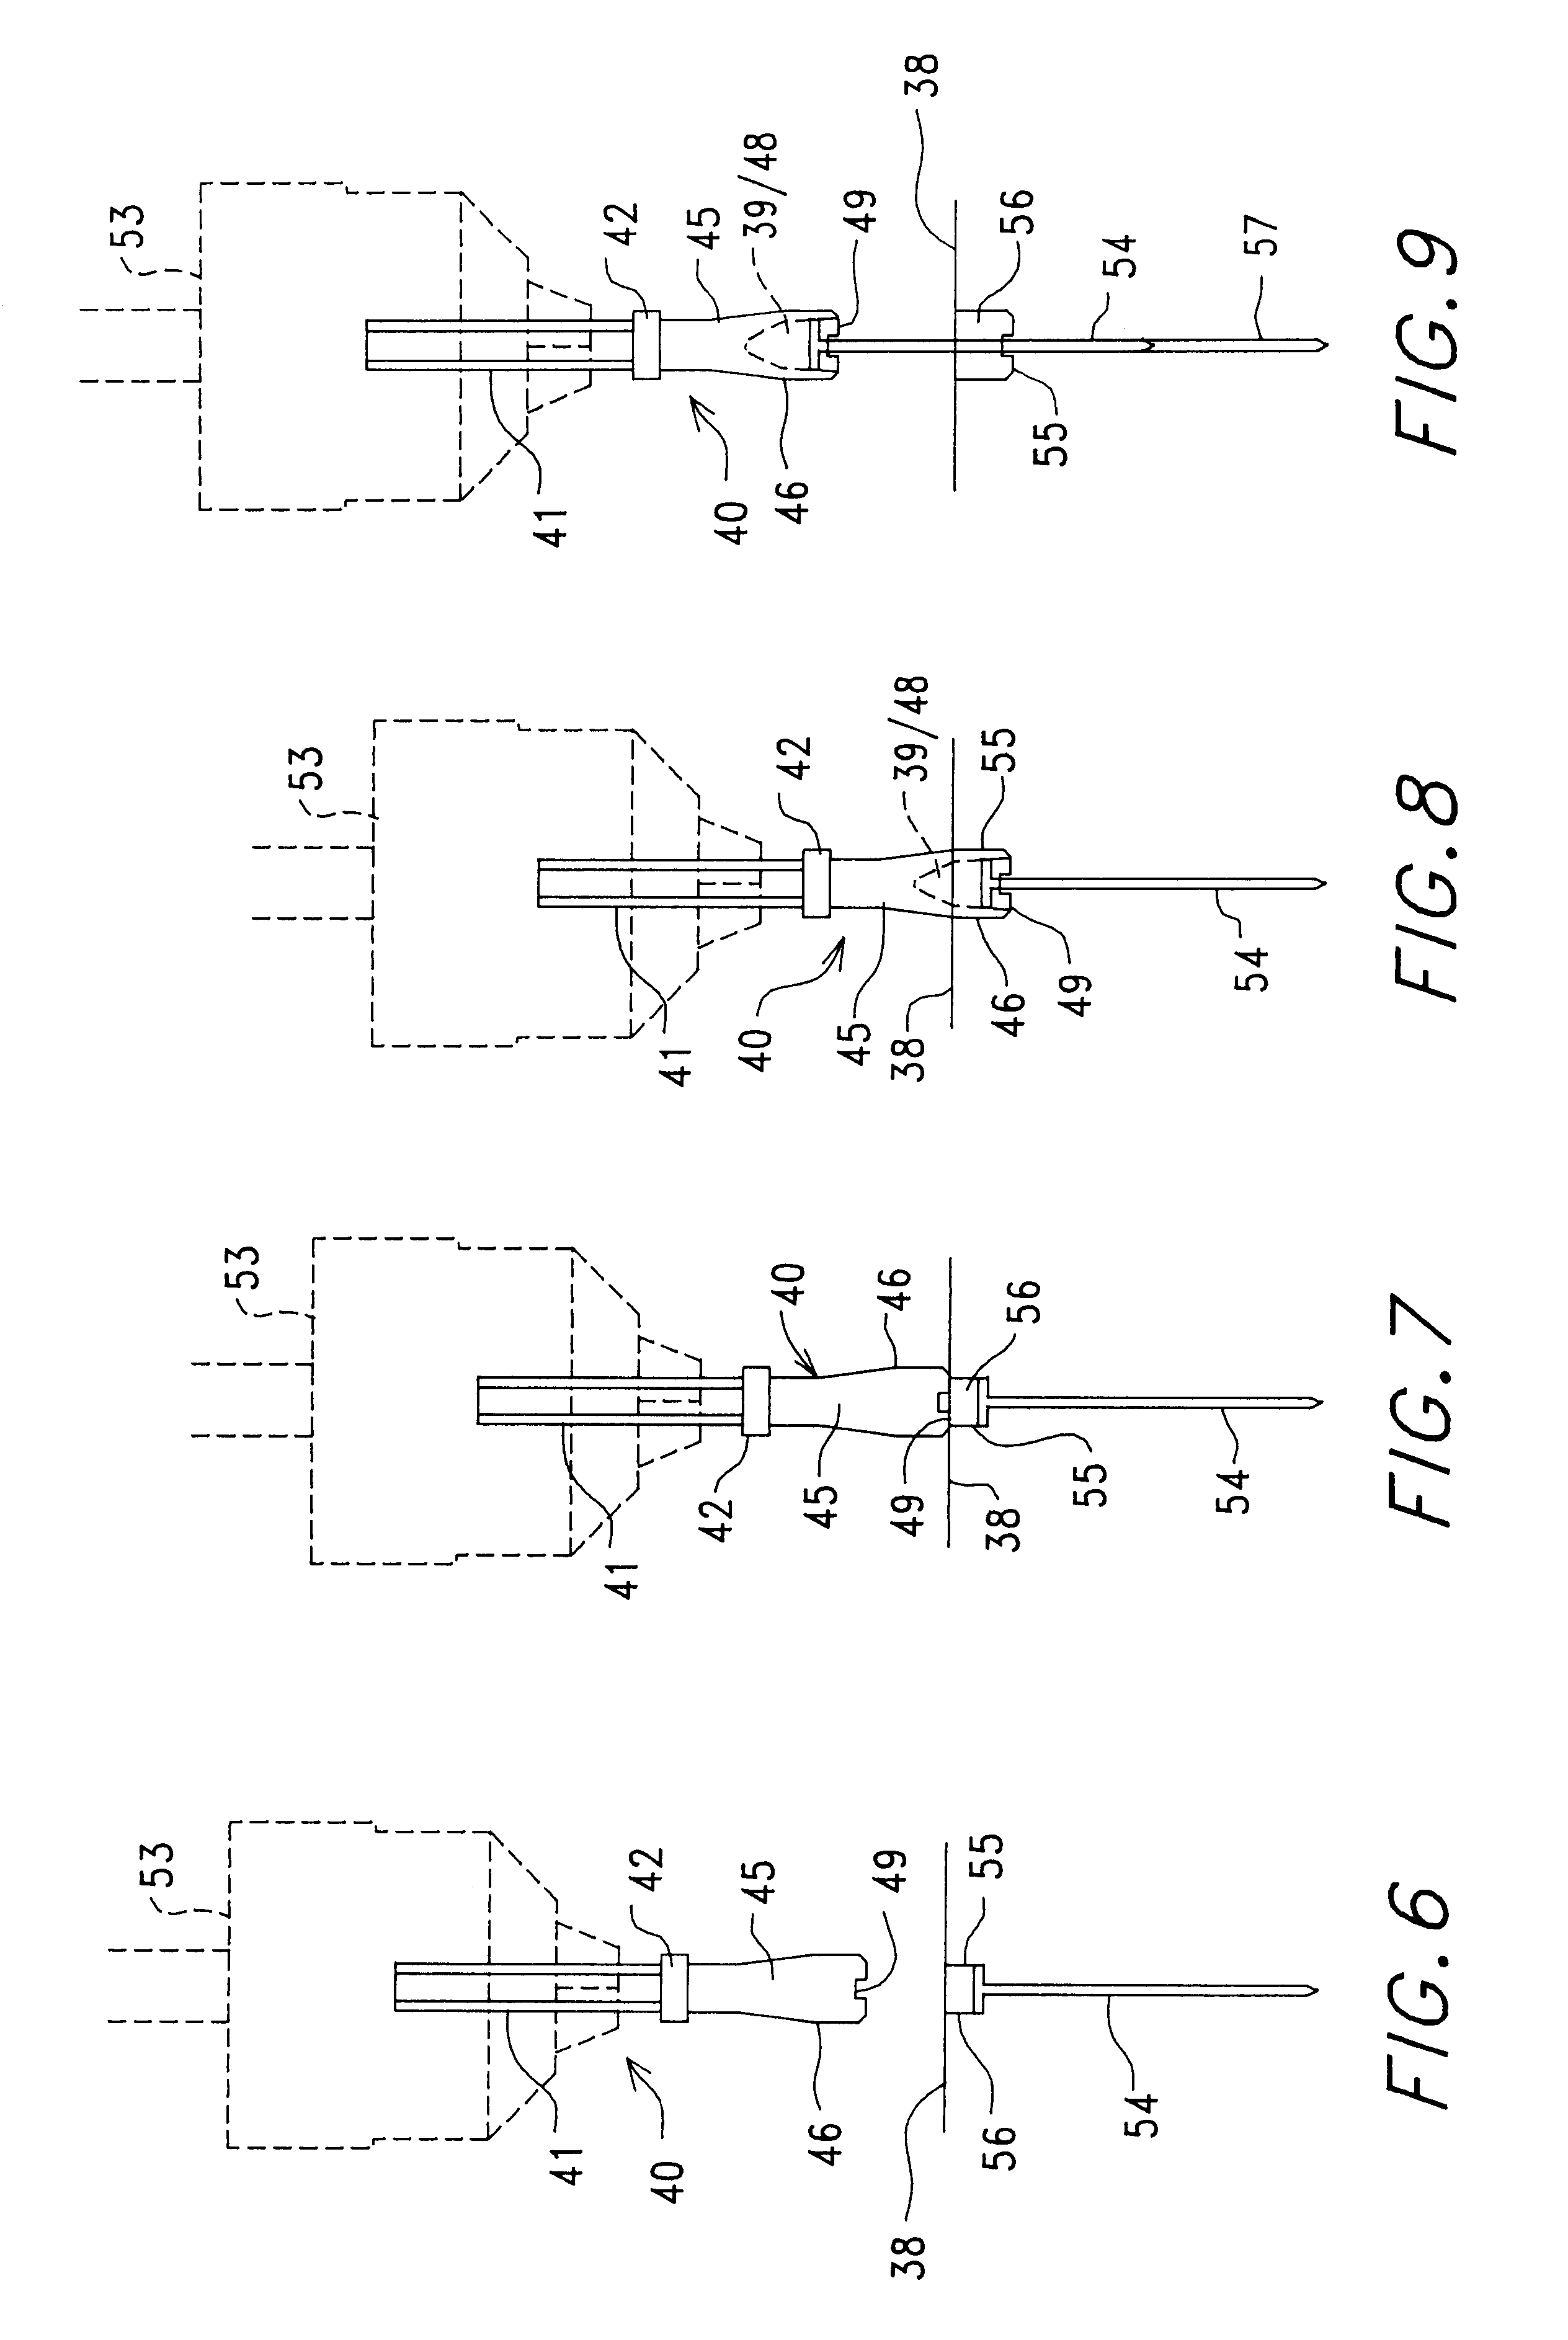 Apparatus for extracting fasteners from a host material